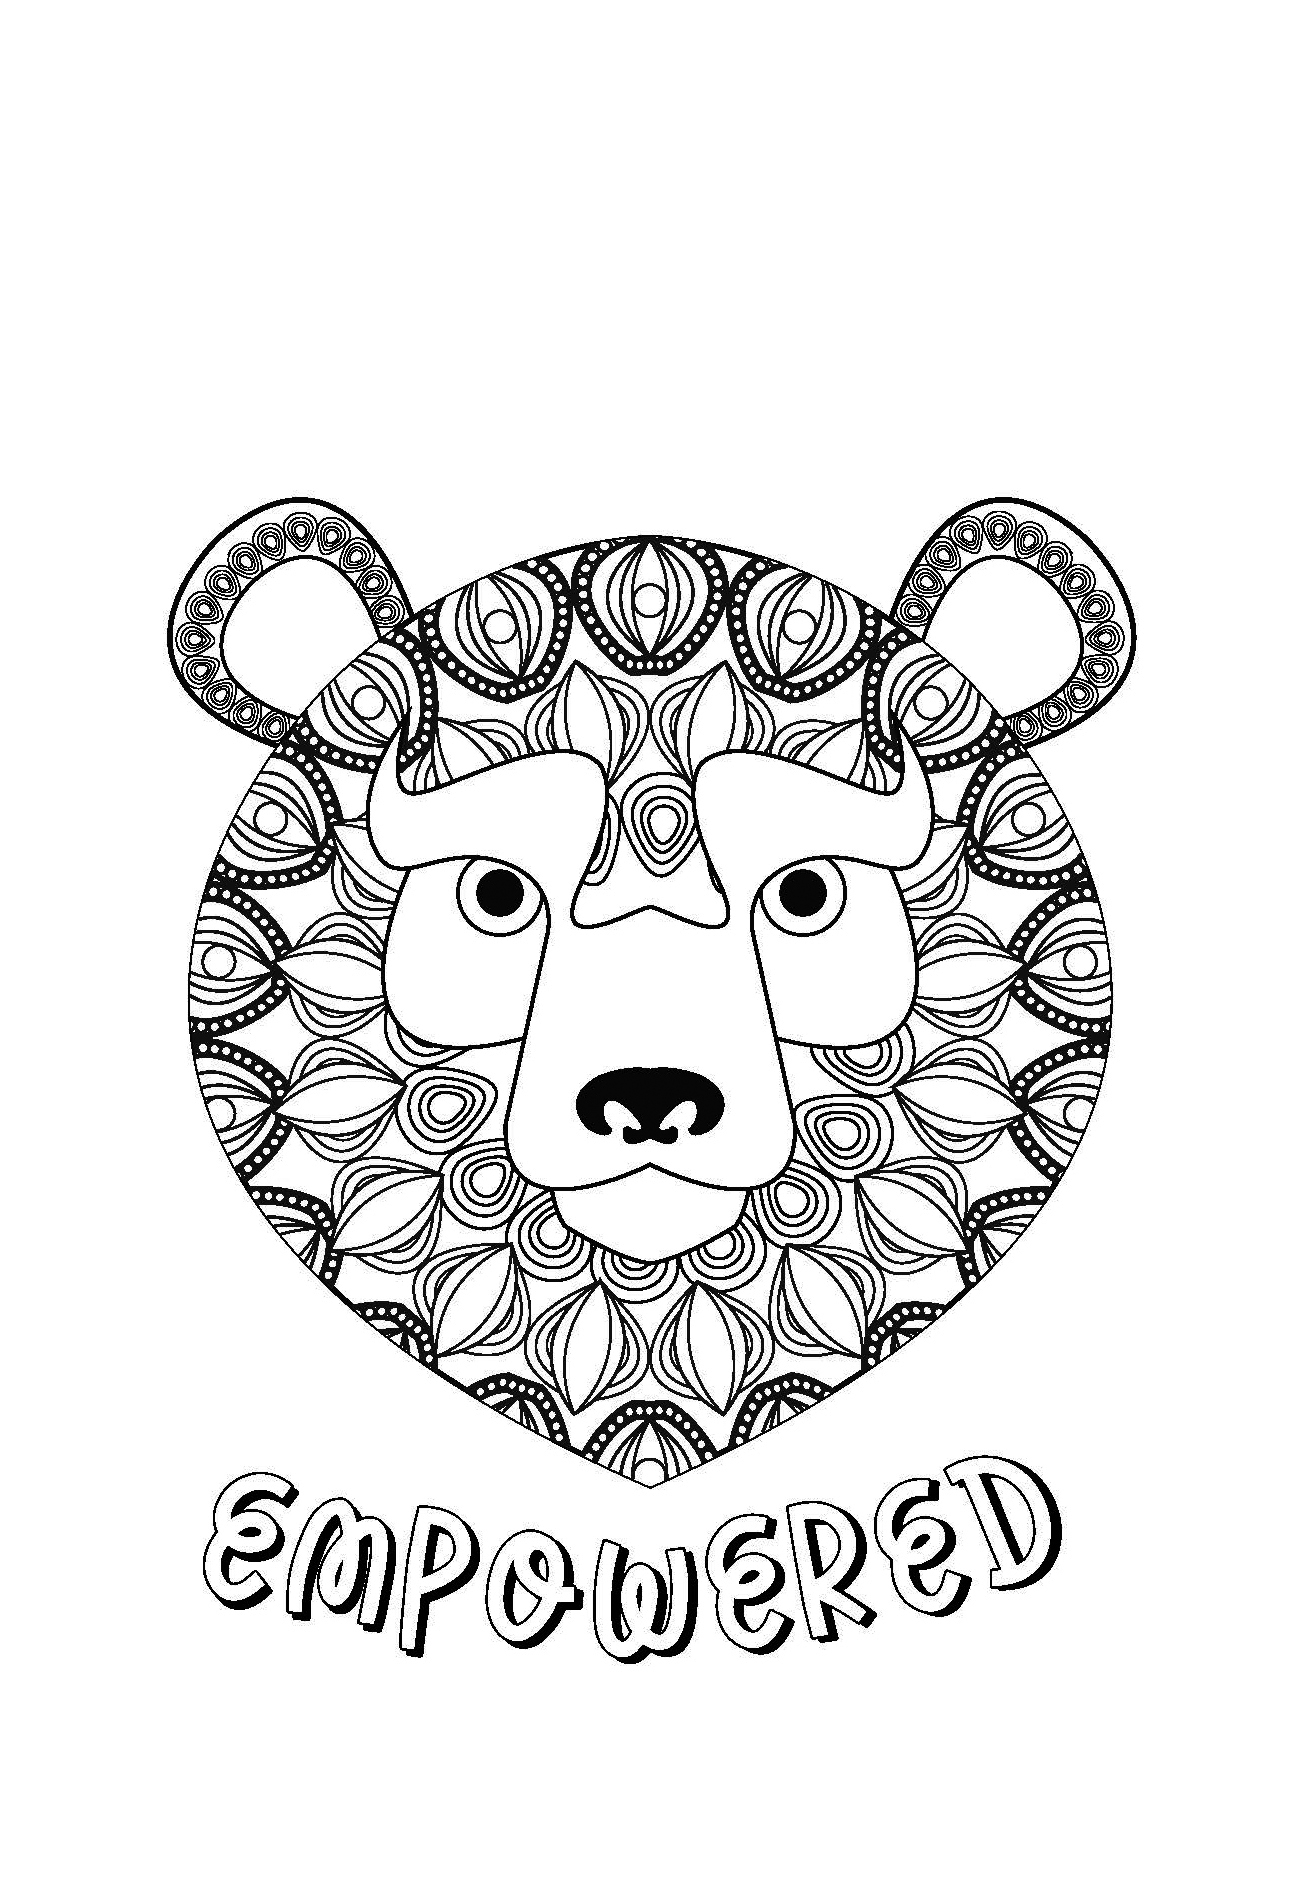 Empowered Colouring Page - Digital Download